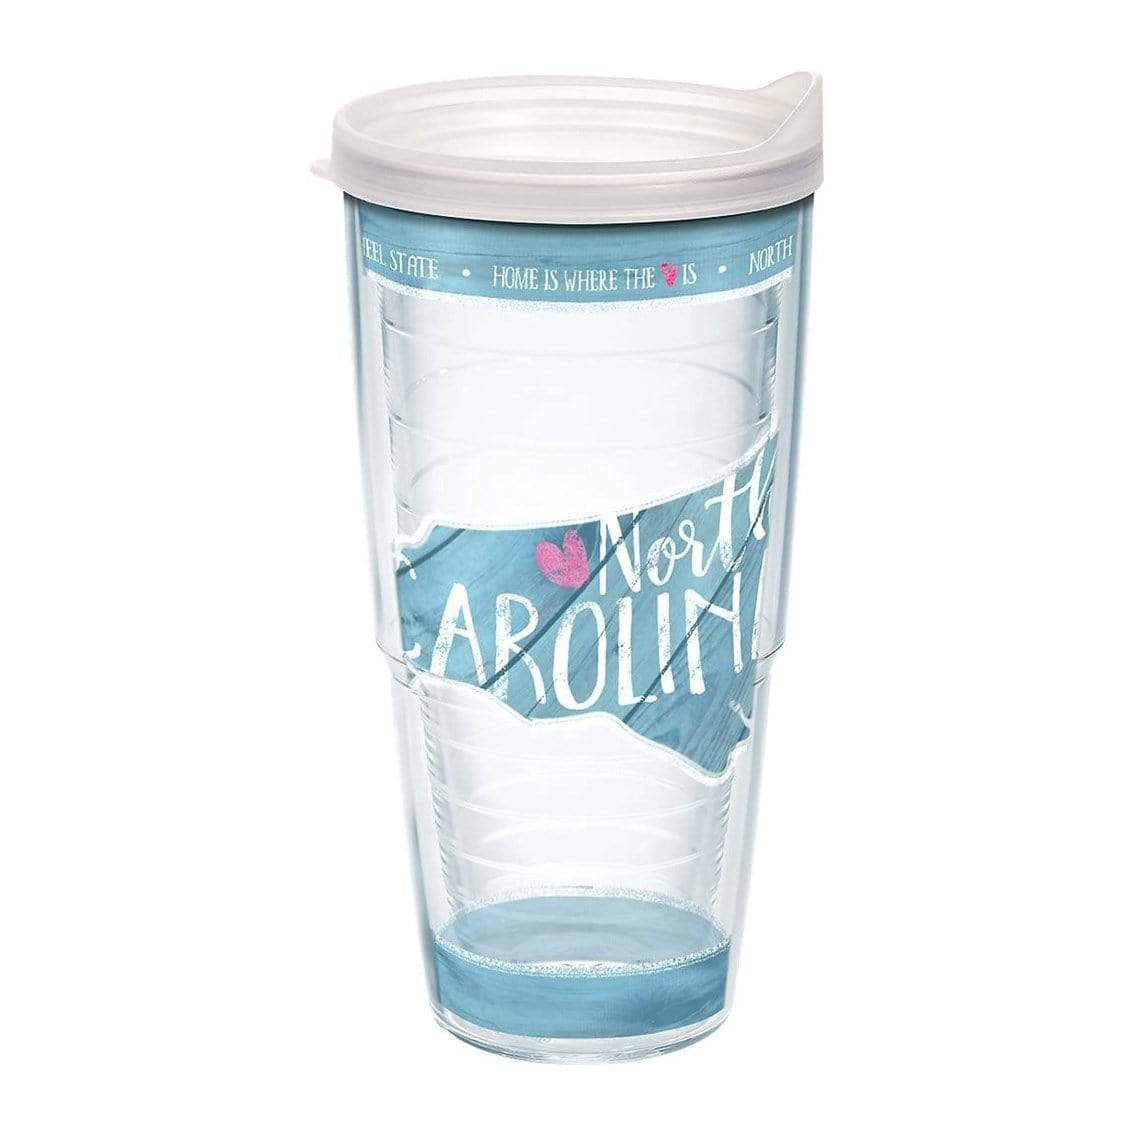 Tervis Tumbler Tervis Tumbler 24 oz North Carolina State Outline Wrap Tumbler With Lid